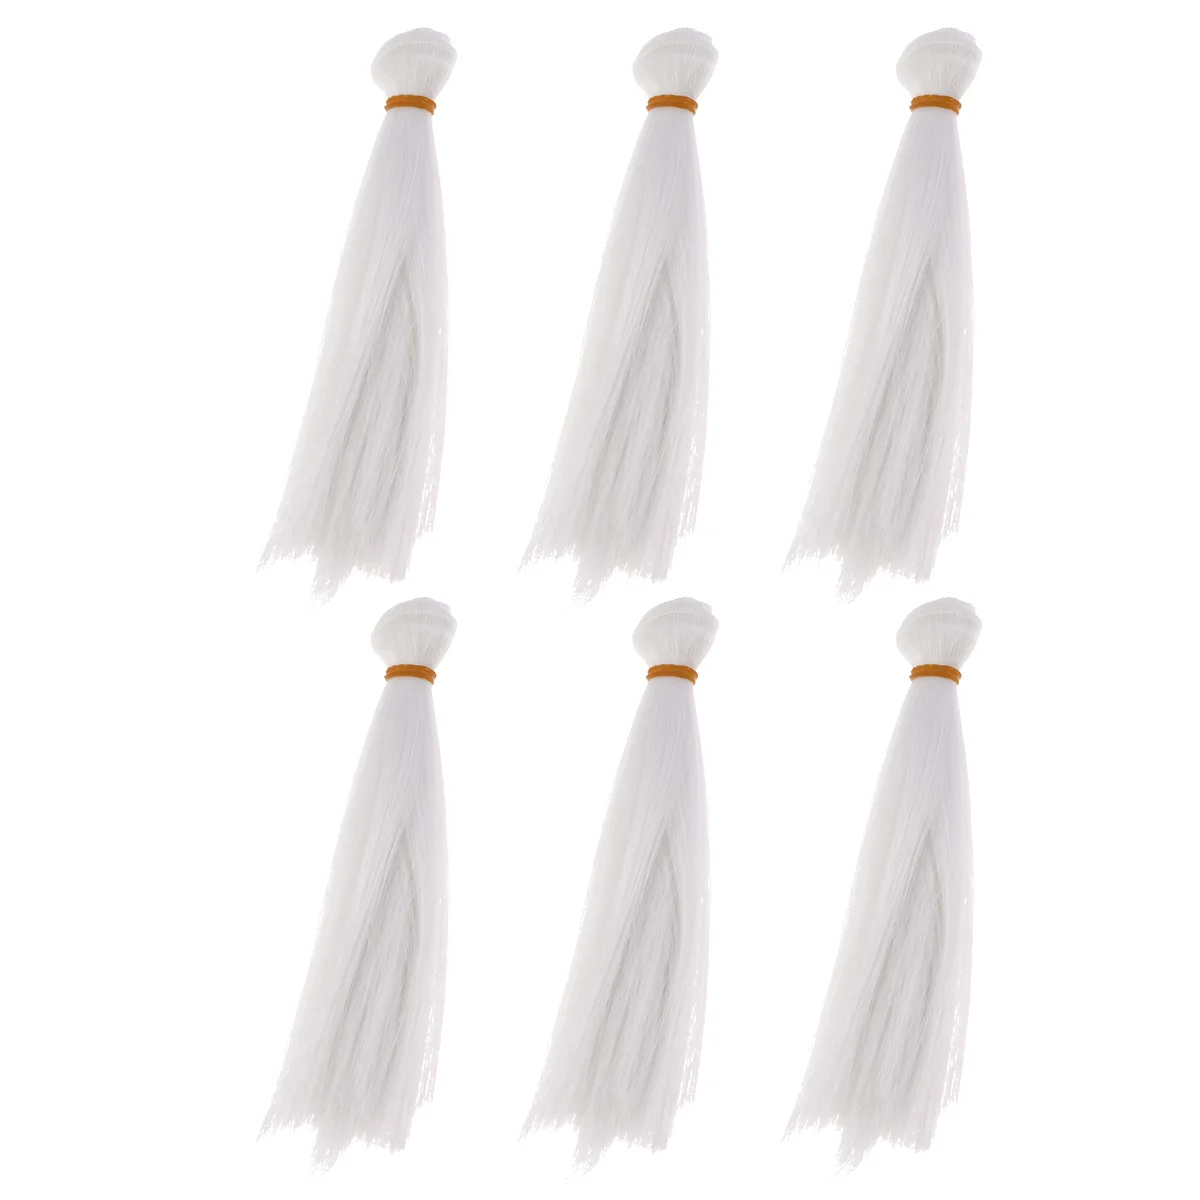 

6pcs 15cm Heat Resistant Straight Hair Handcraft DIY Wigs Weft Hair Extensions (White)